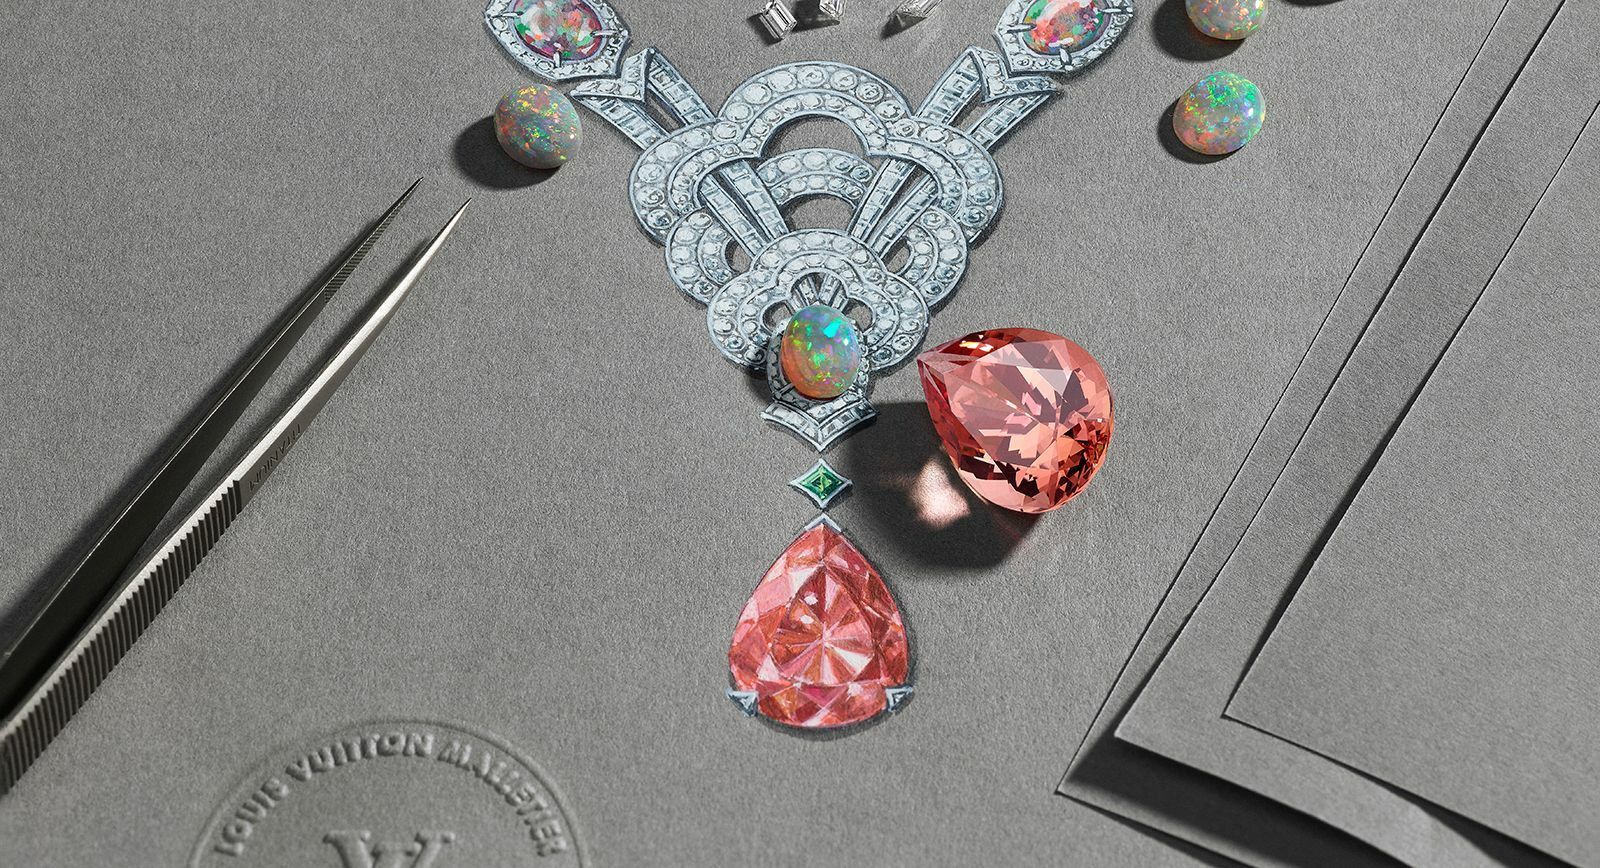 Louis Vuitton's journey into the world of high jewellery